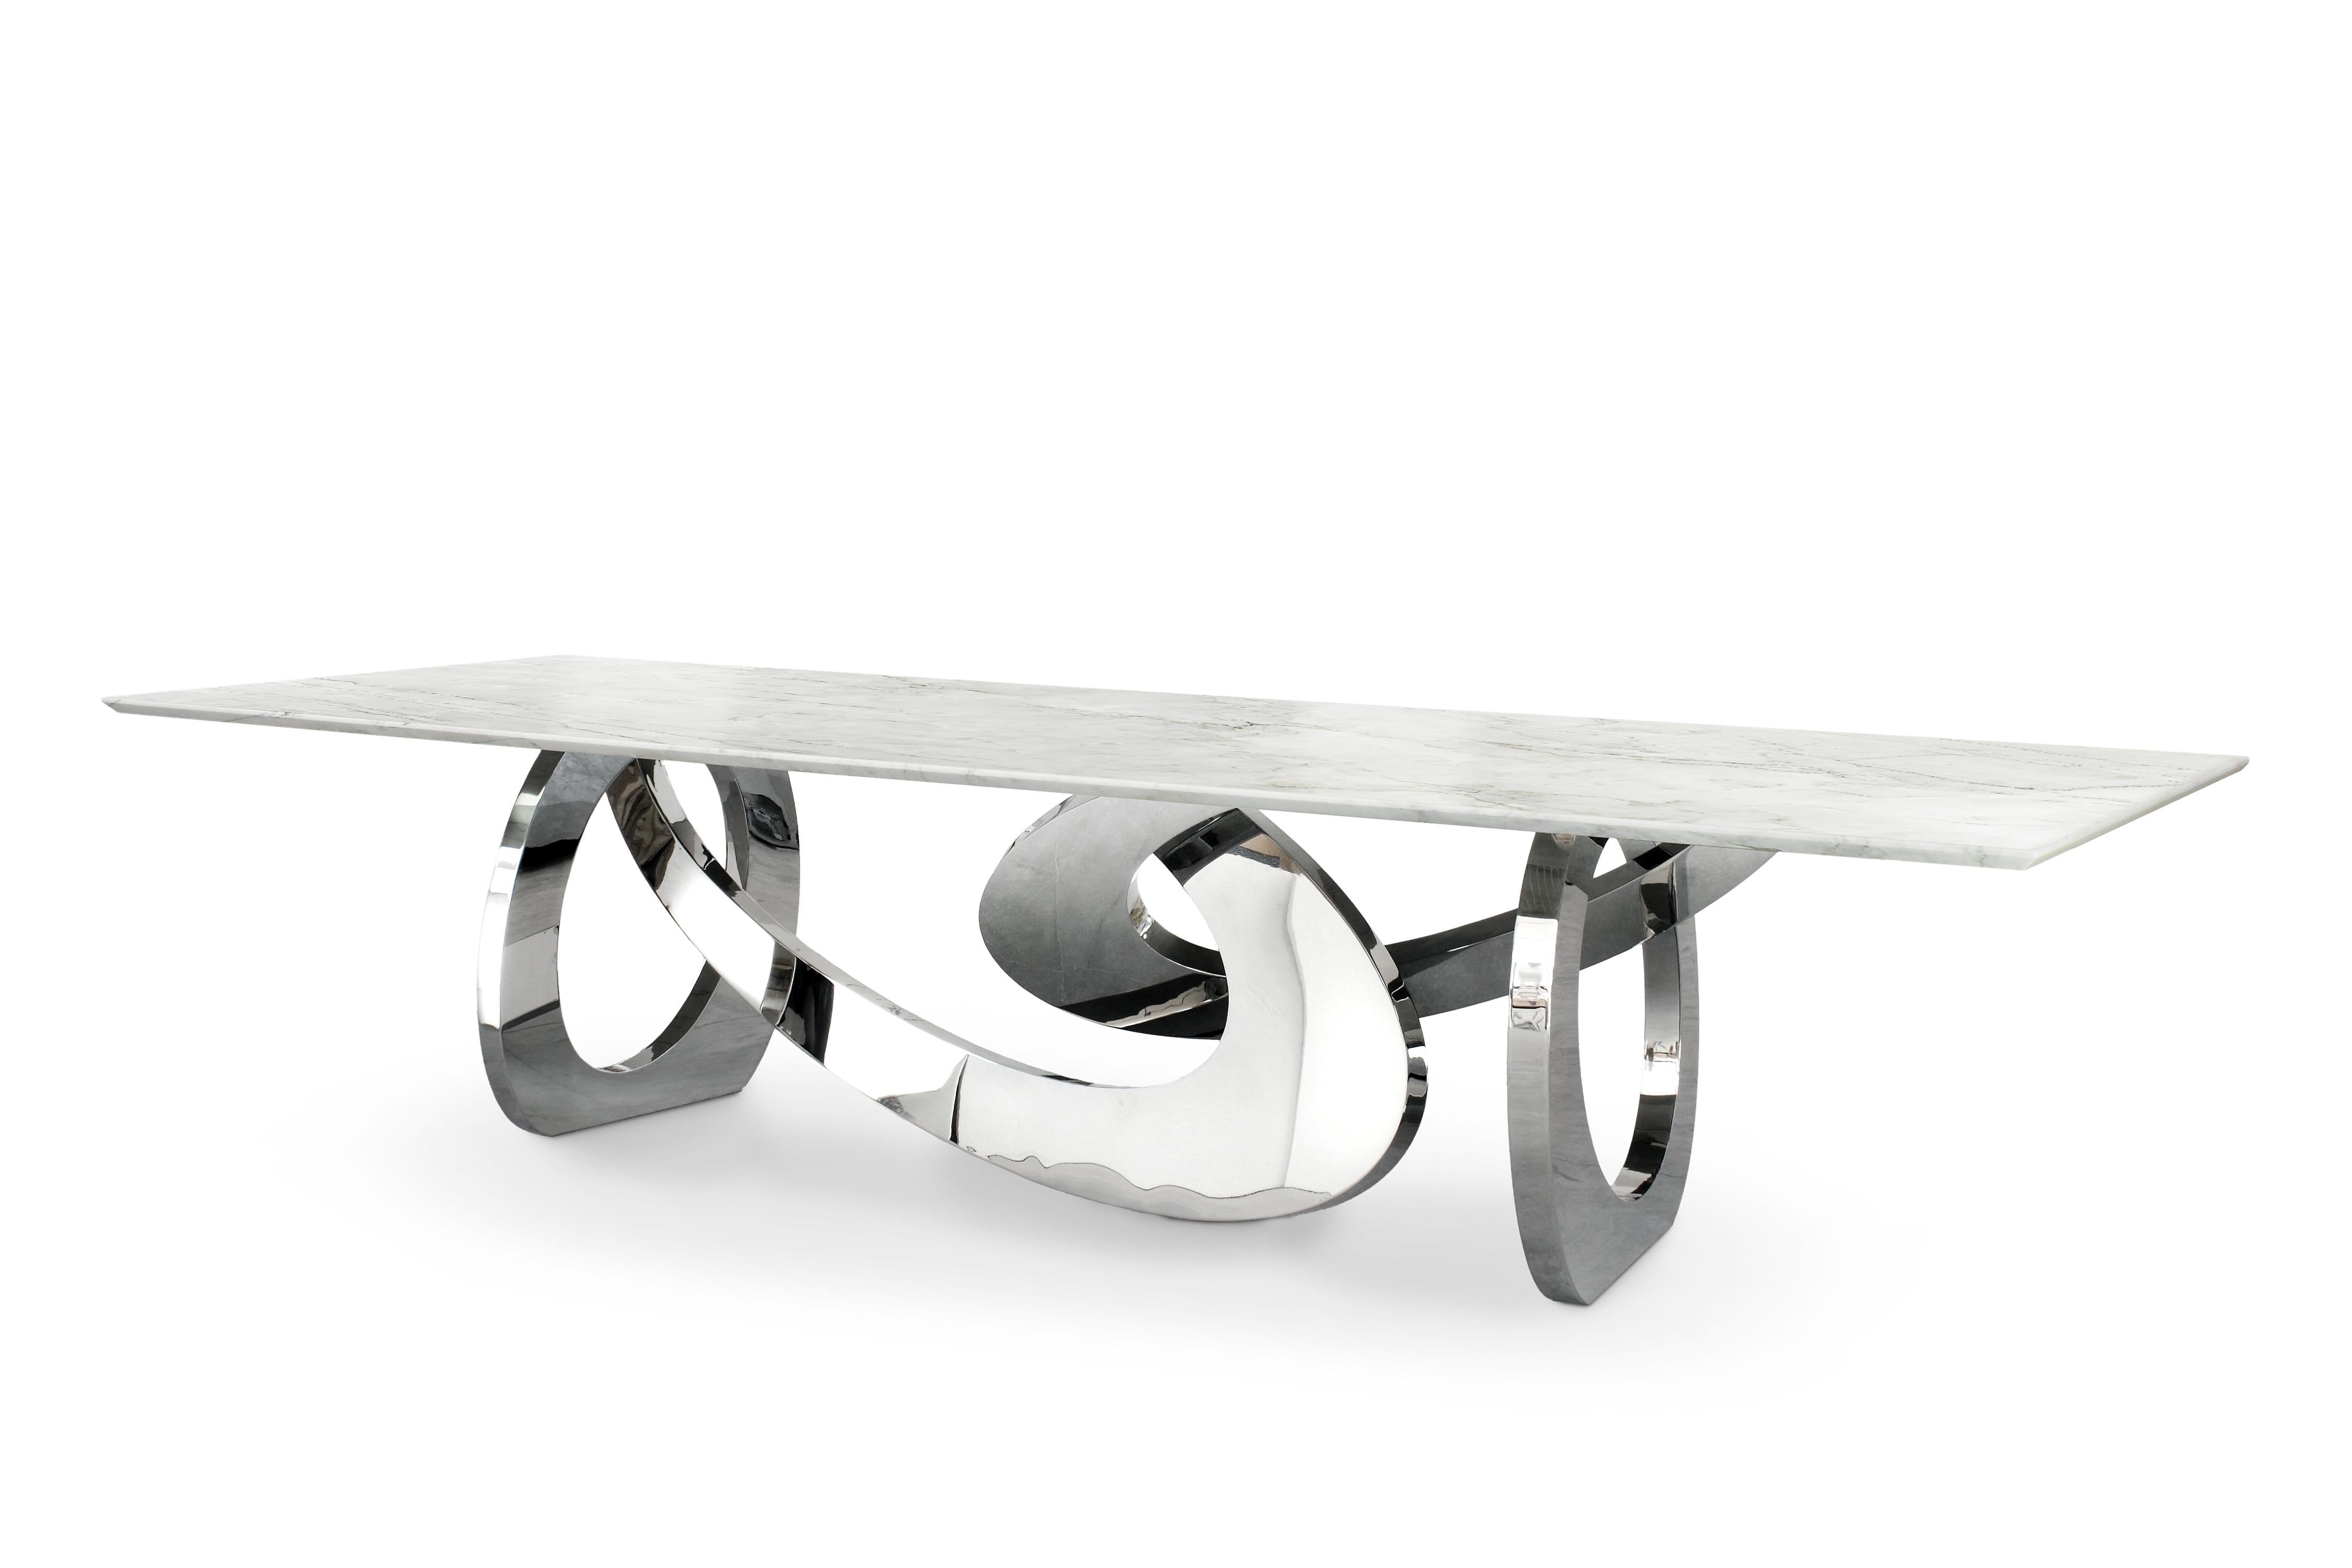 The table 'Bangles Stone' is an important scultural dining table with structure in mirror polished stainless steel and top in Tahiti quartzite (Origin: Brazil).Every single bangle is welded and highly polished by hand. The mirror-like finishing of